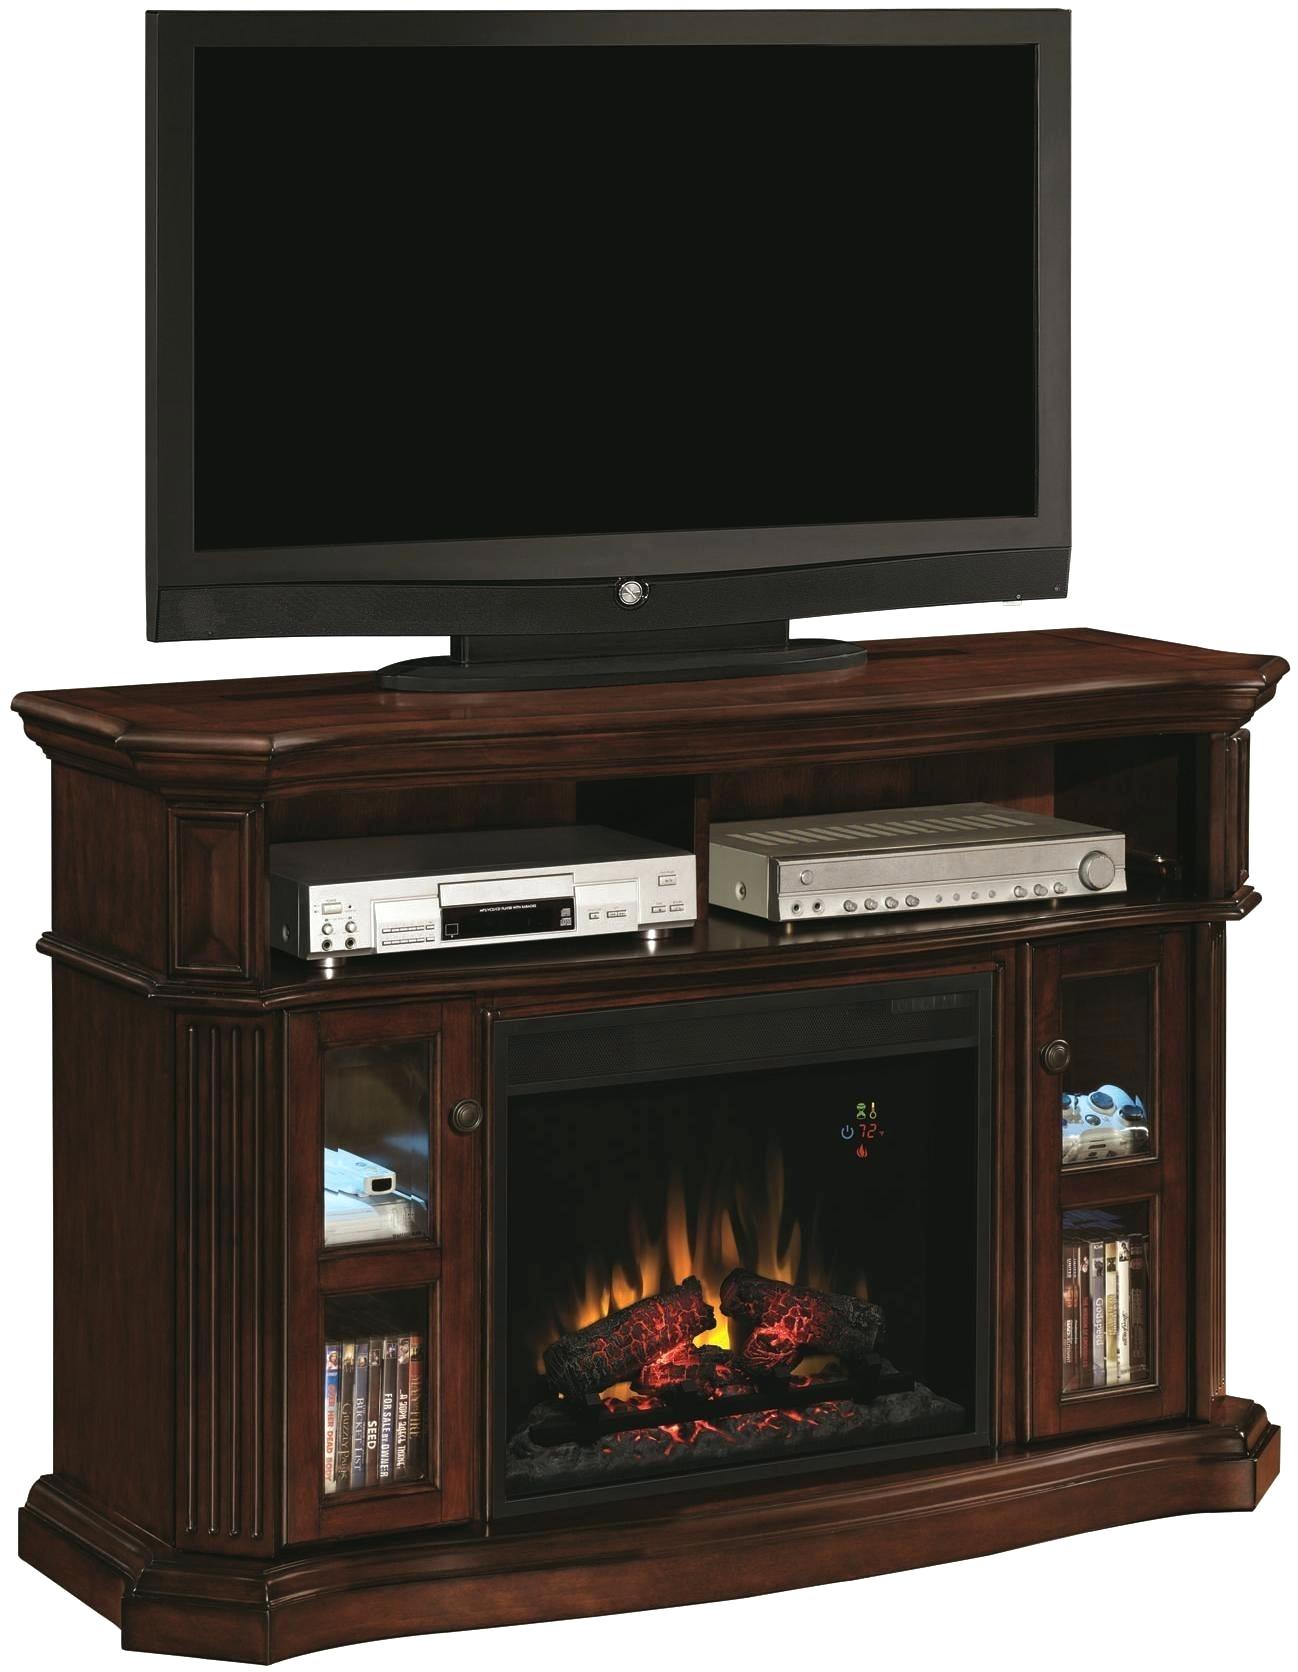 Barn Door Entertainment Center with Fireplace Best Of Media Cabinet with Fireplace – Leakpapa